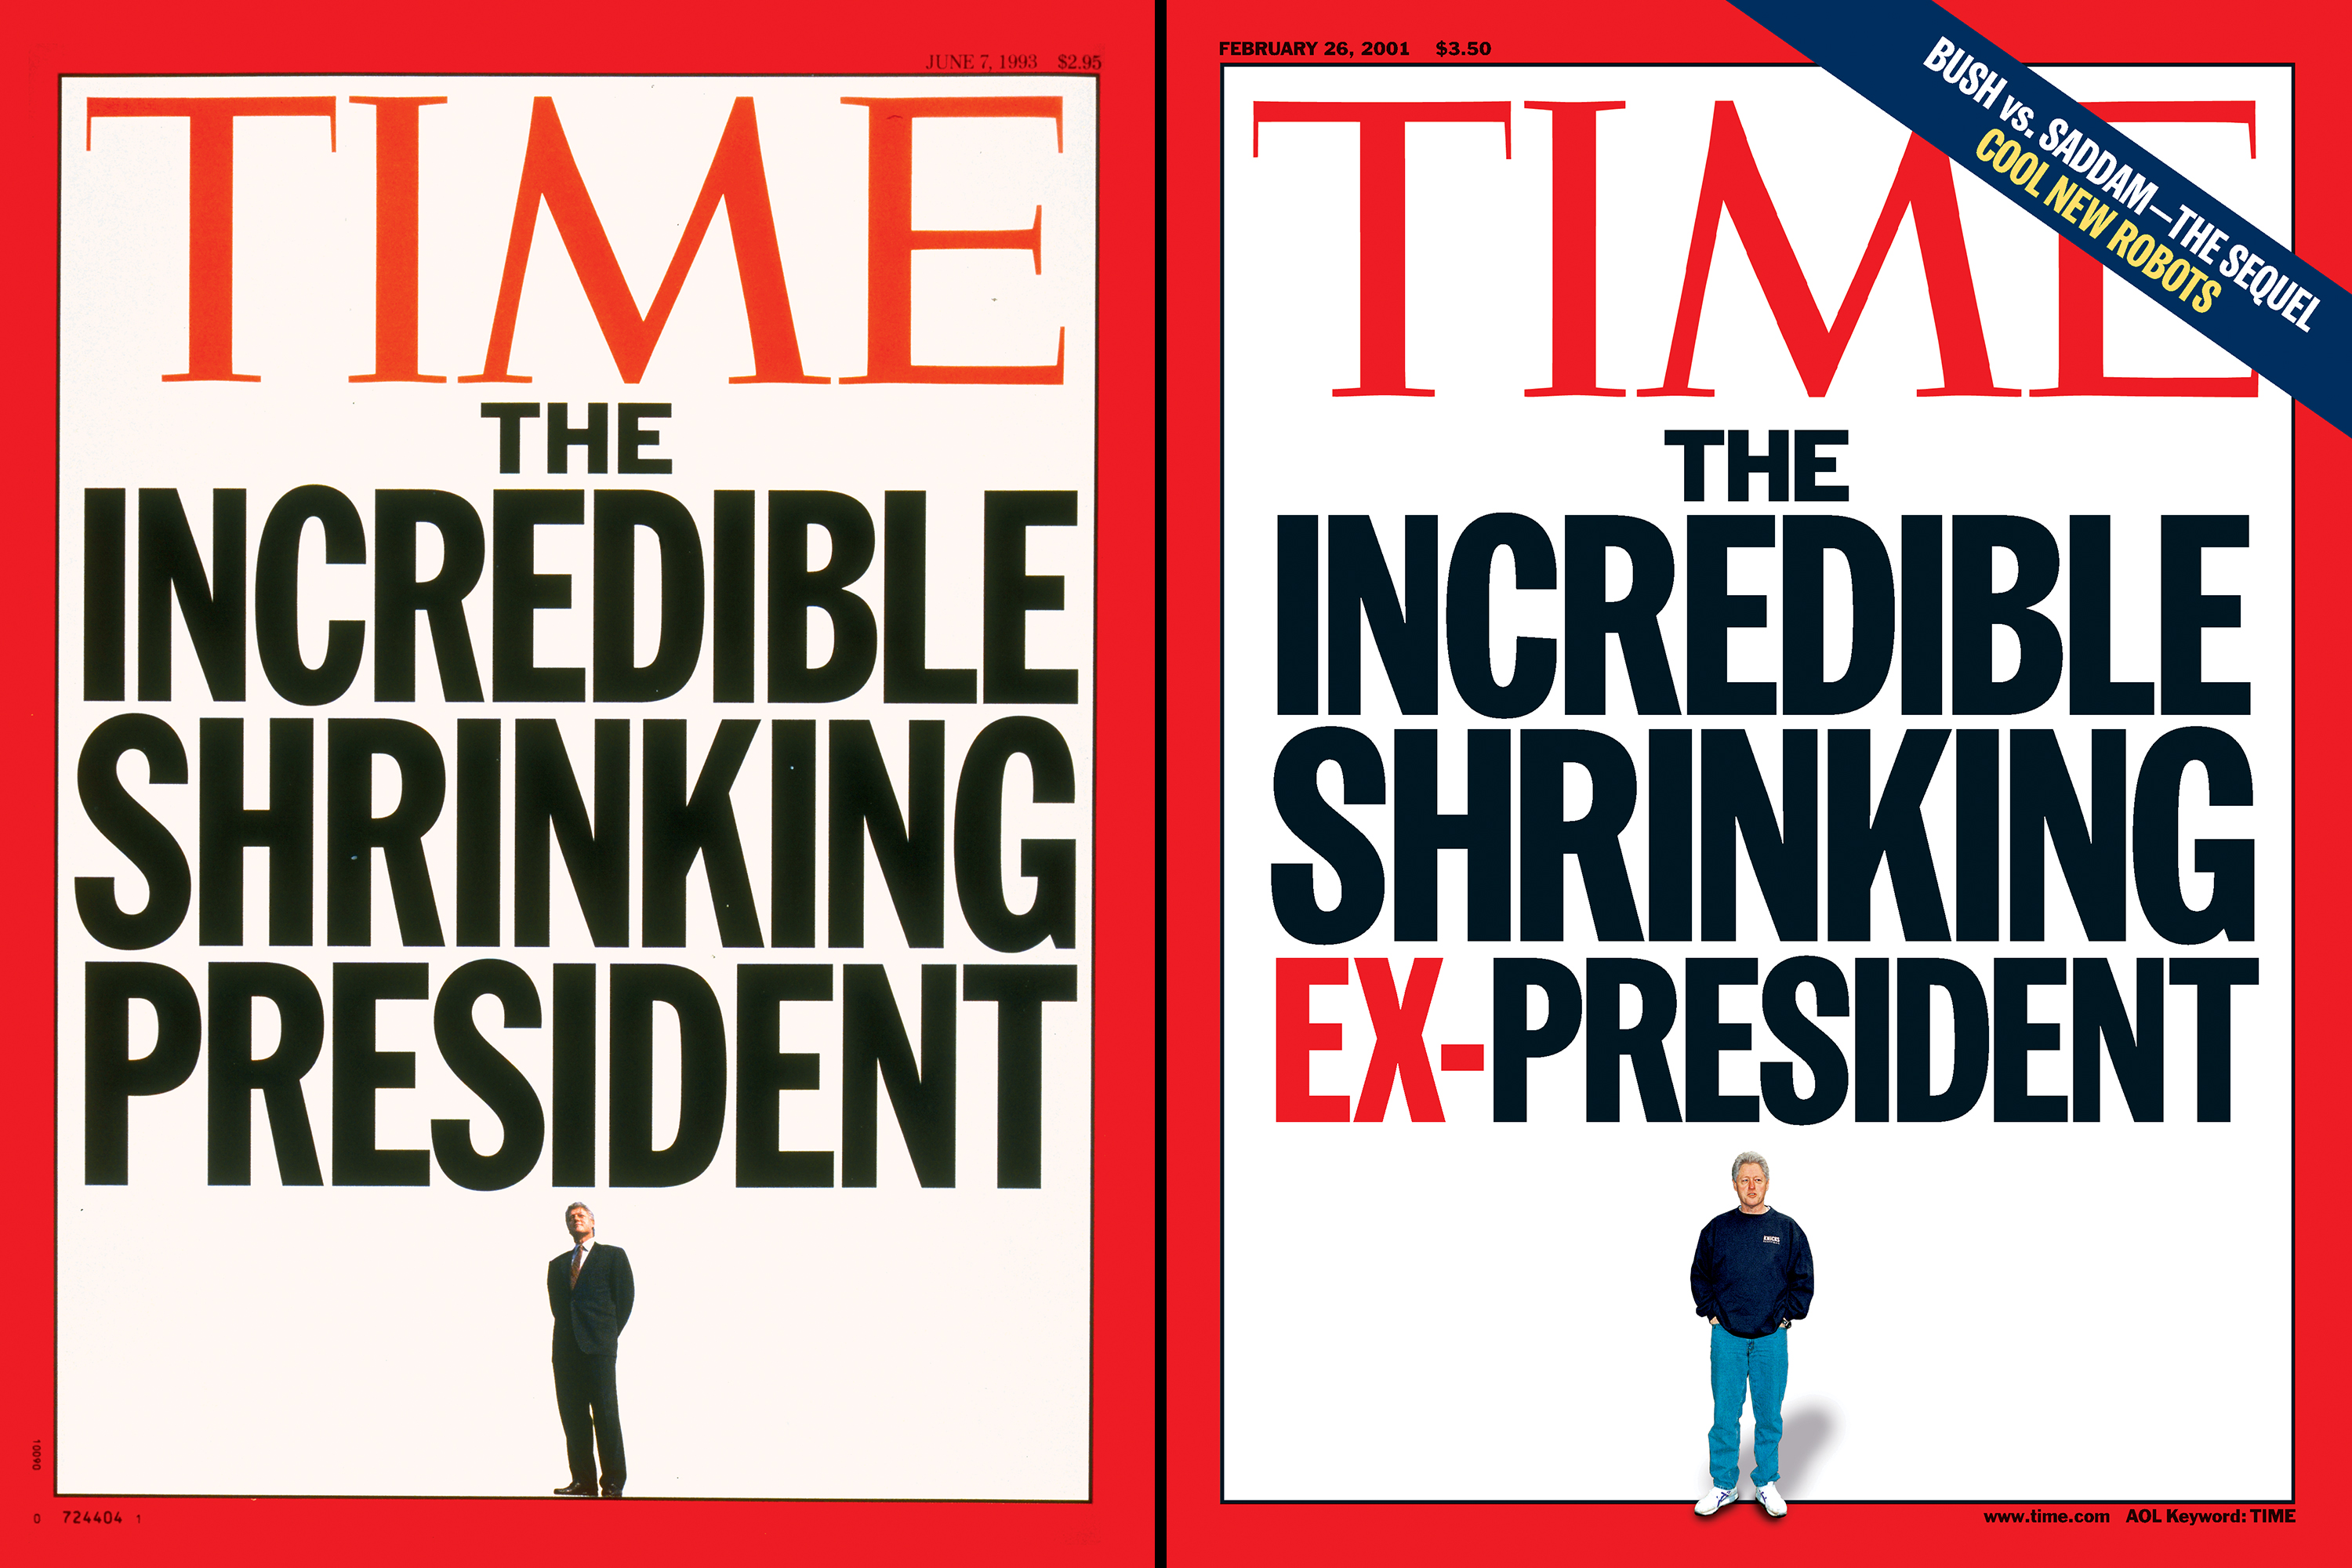 The Incredible Shrinking President,